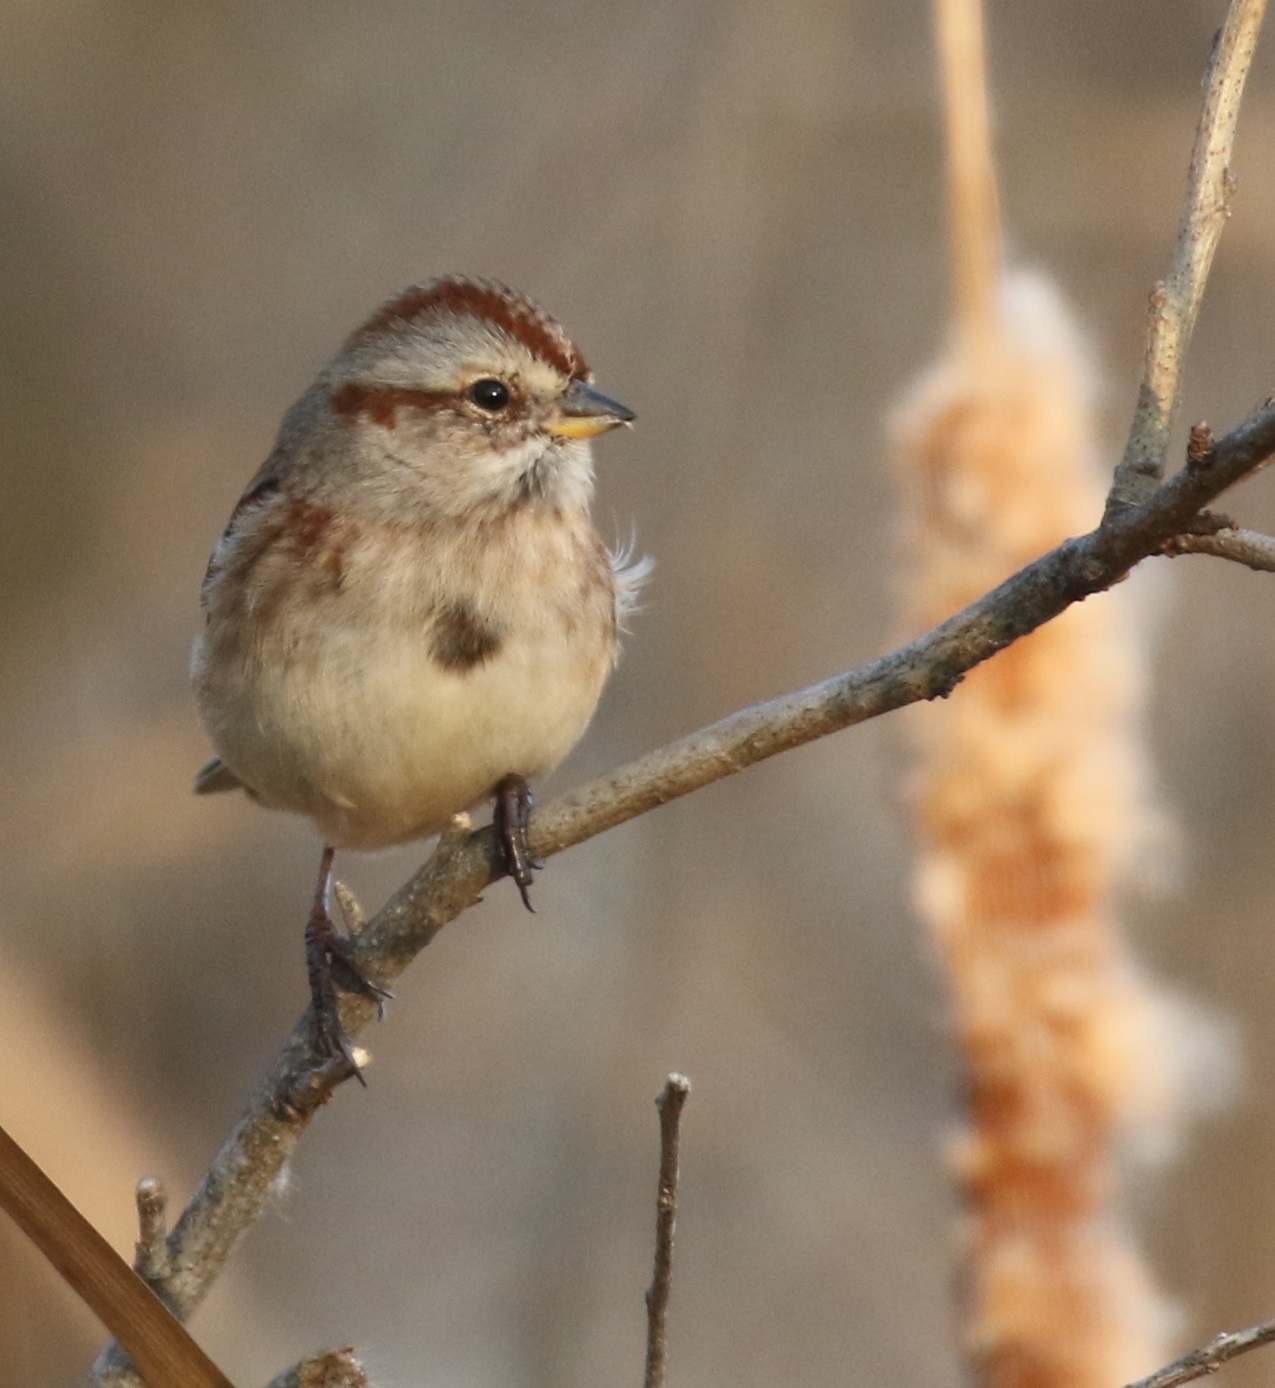 American tree sparrow has a central dark spot on a light colored breast. It has rusty stripes on the cap of its head and its lower bill is light colored.